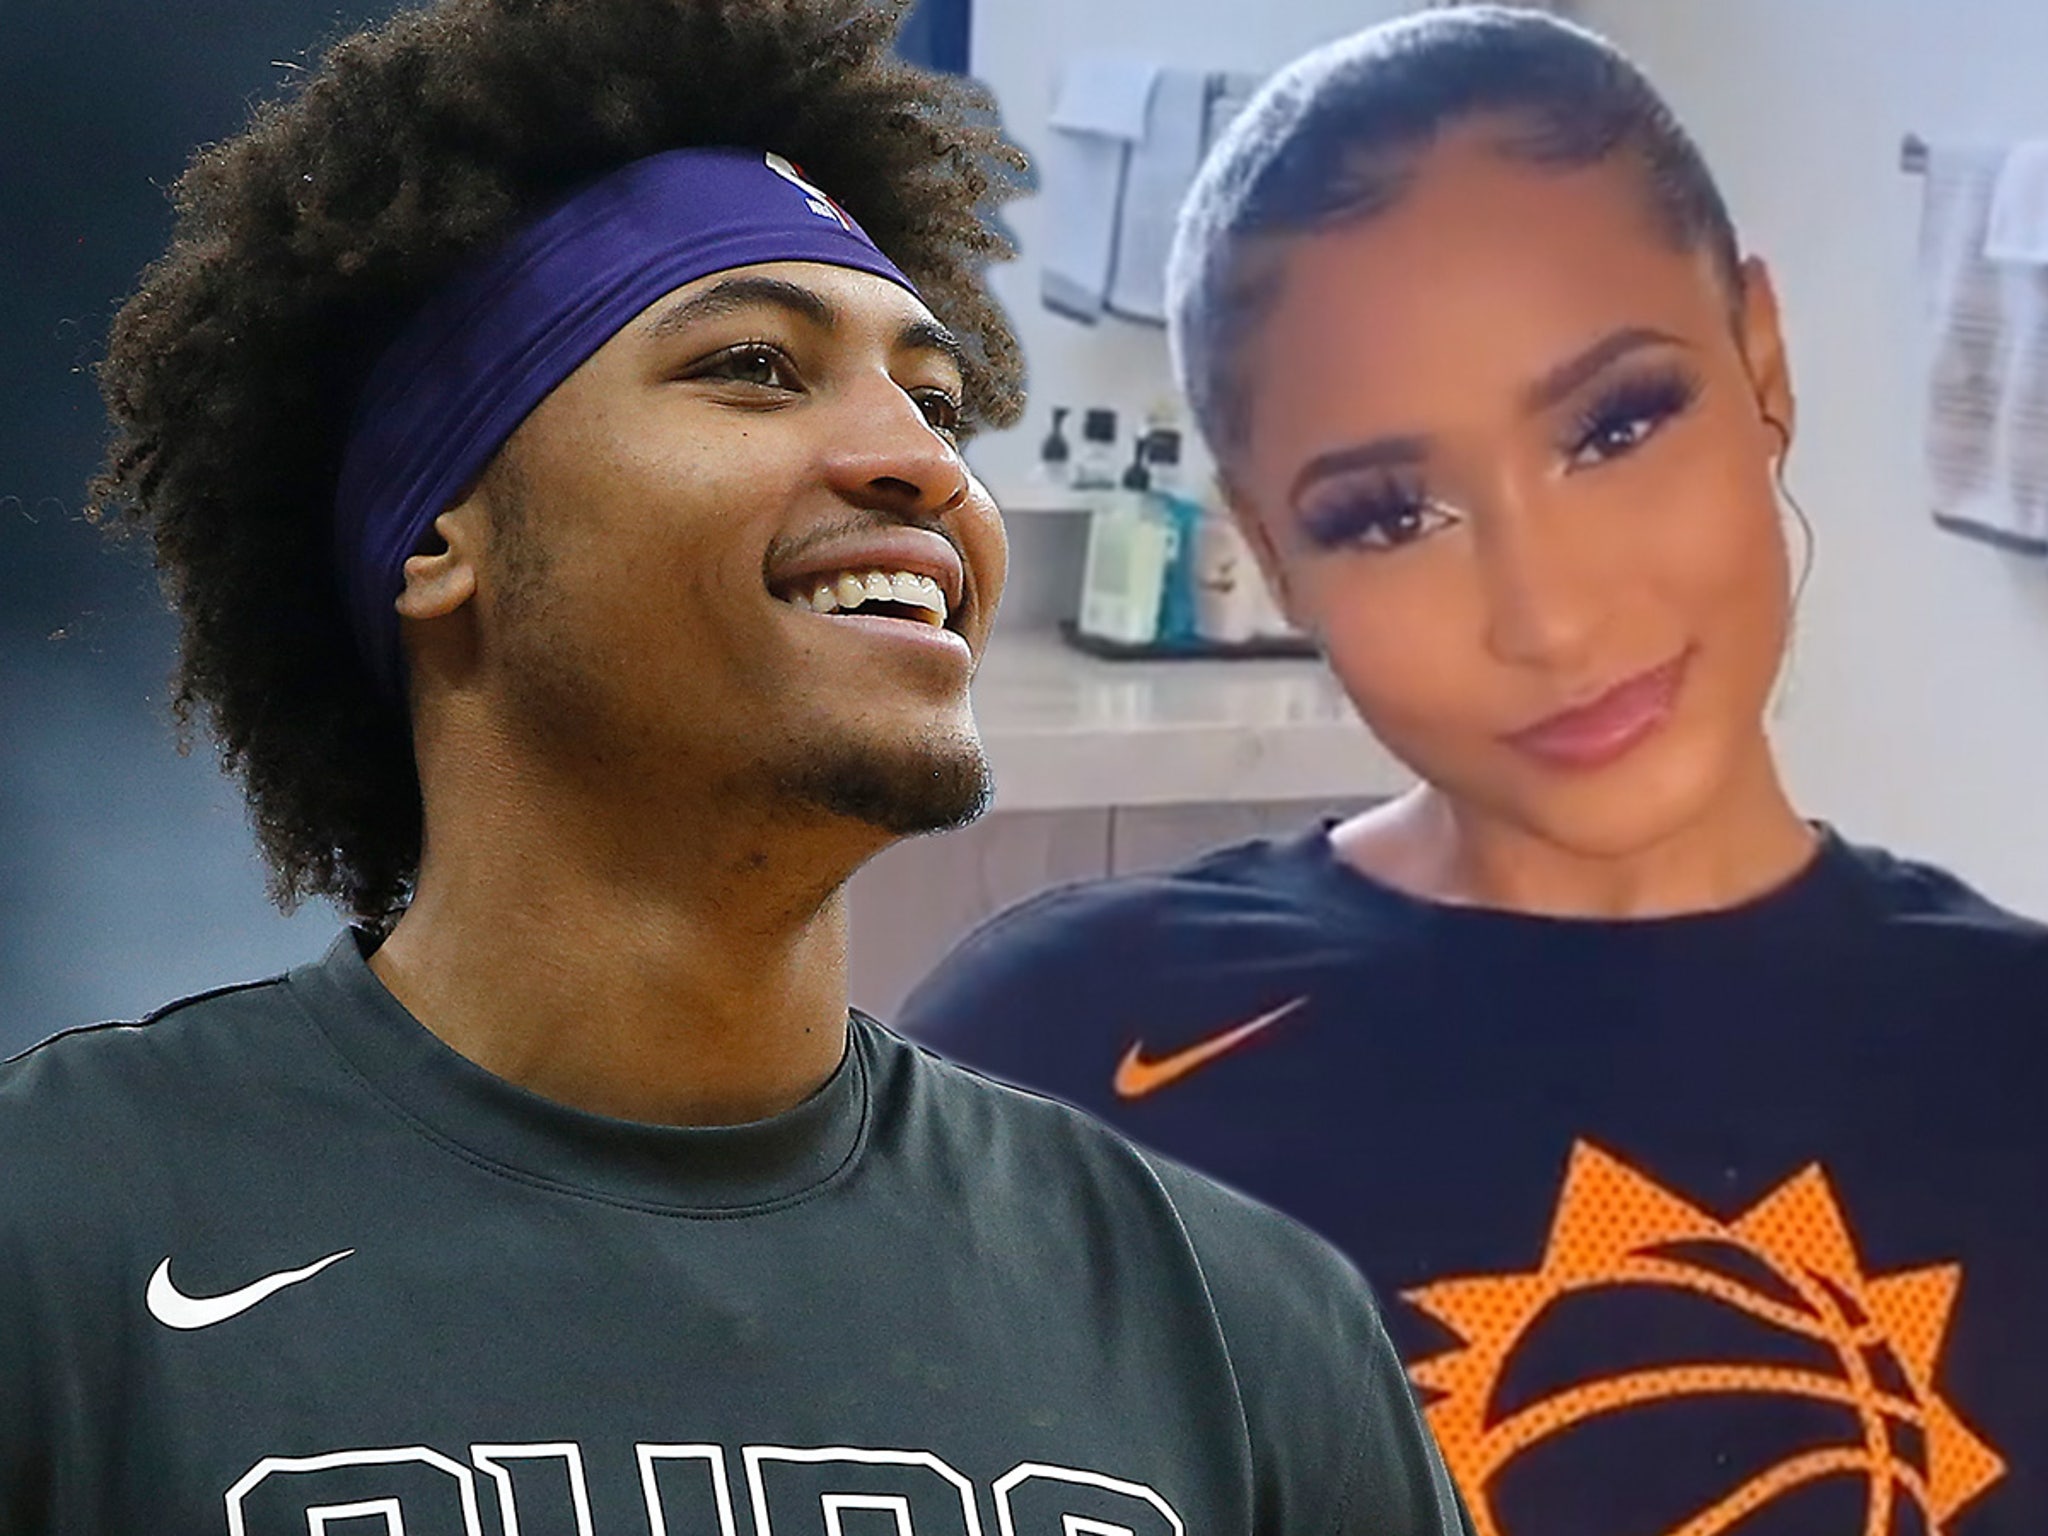 NBA's Kelly Oubre, Jr. Proposes To Girlfriend With Huge Ring, She